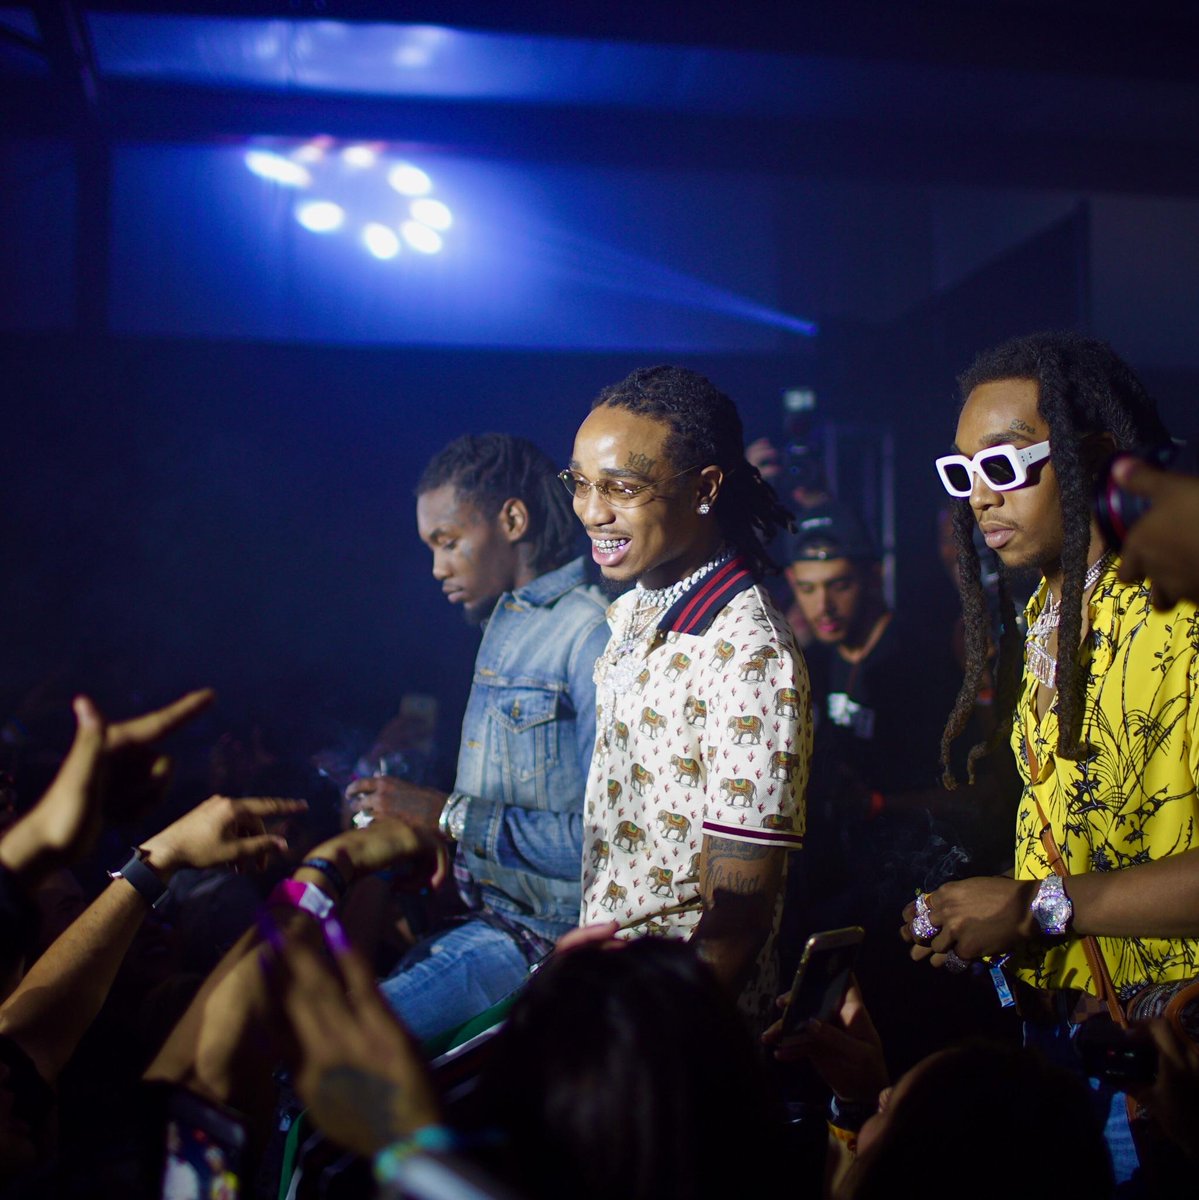 RT @RevoltTV: Our #REVOLThouse desert party is still on and poppin' ???? Whattup @Migos! #teamLOVE | ???? @JayOhh_ https://t.co/RSQmLS9Hft